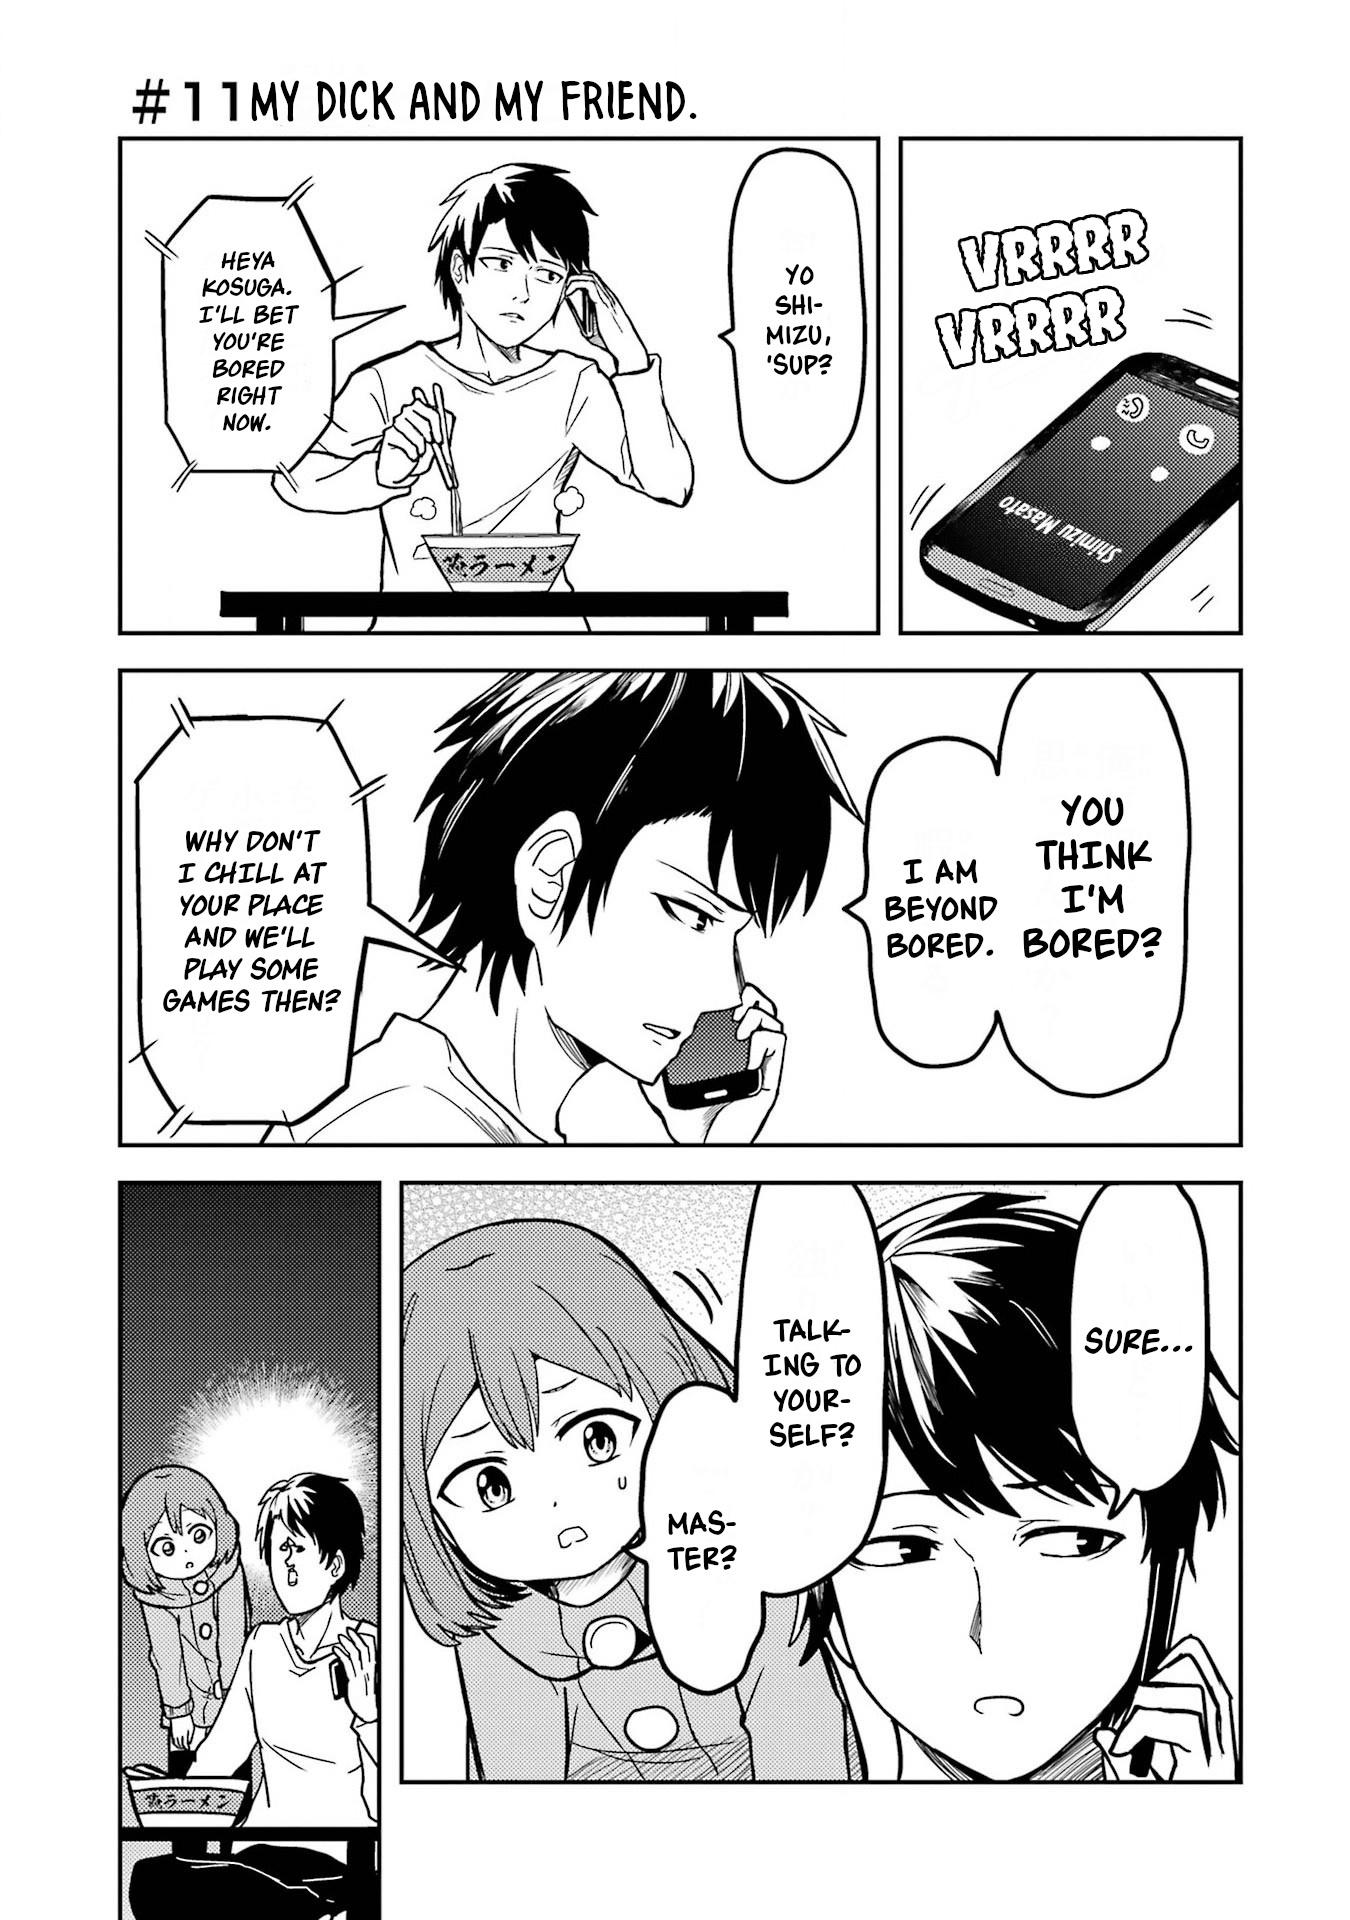 Read Turns Out My Dick Was A Cute Girl Vol1 Chapter 11 My Dick And My Friend On Mangakakalot